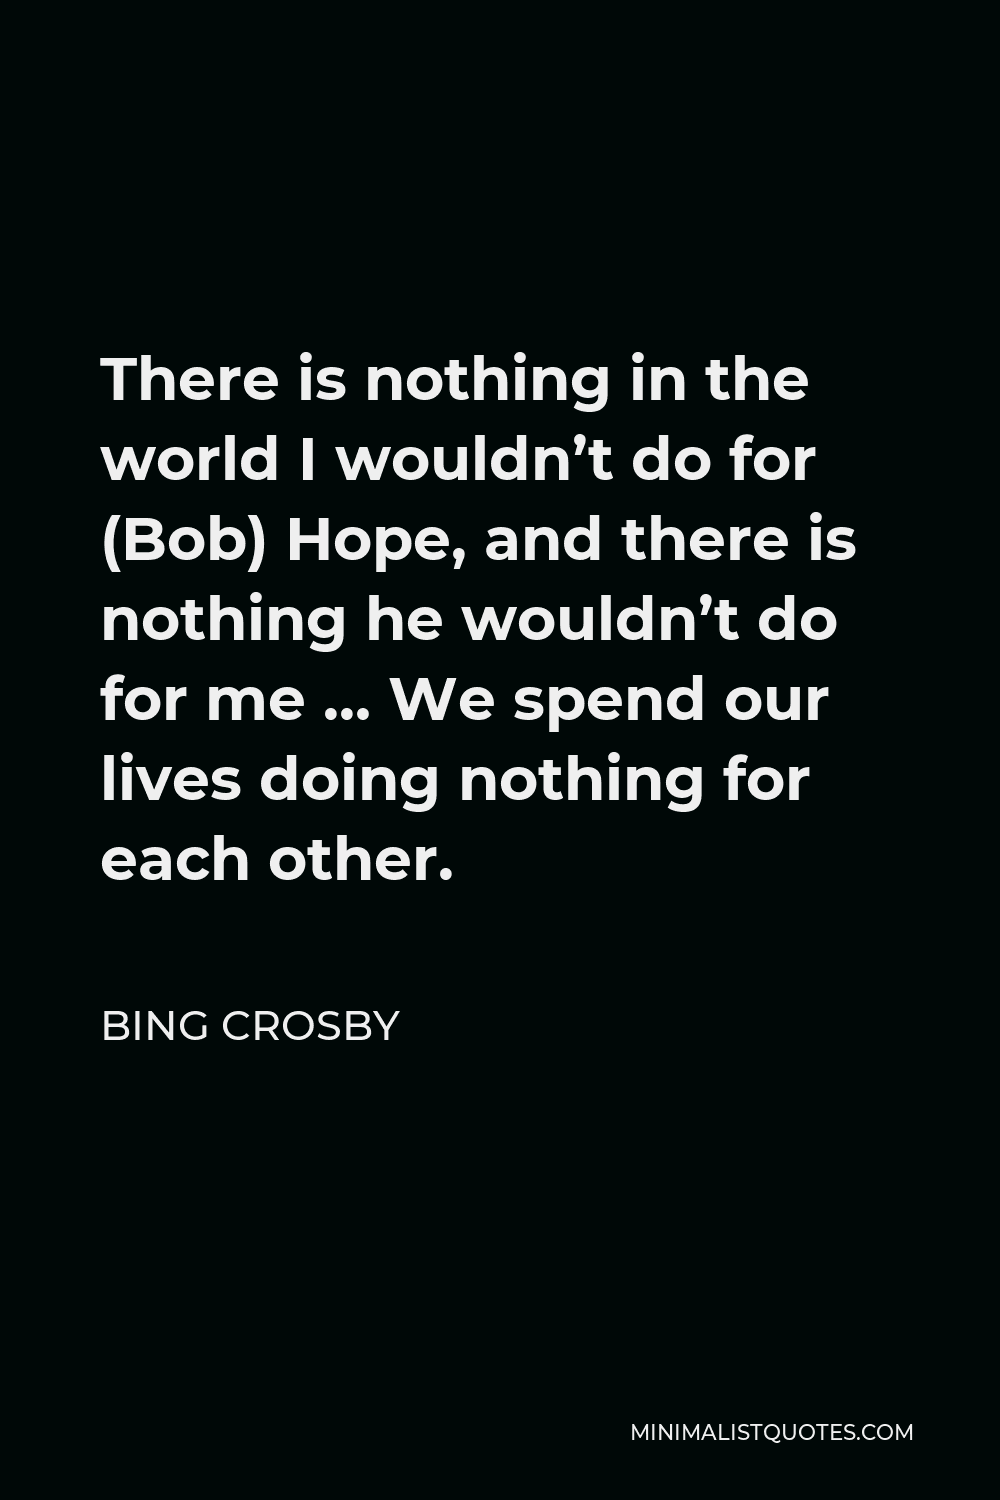 Bing Crosby Quote - There is nothing in the world I wouldn’t do for (Bob) Hope, and there is nothing he wouldn’t do for me … We spend our lives doing nothing for each other.